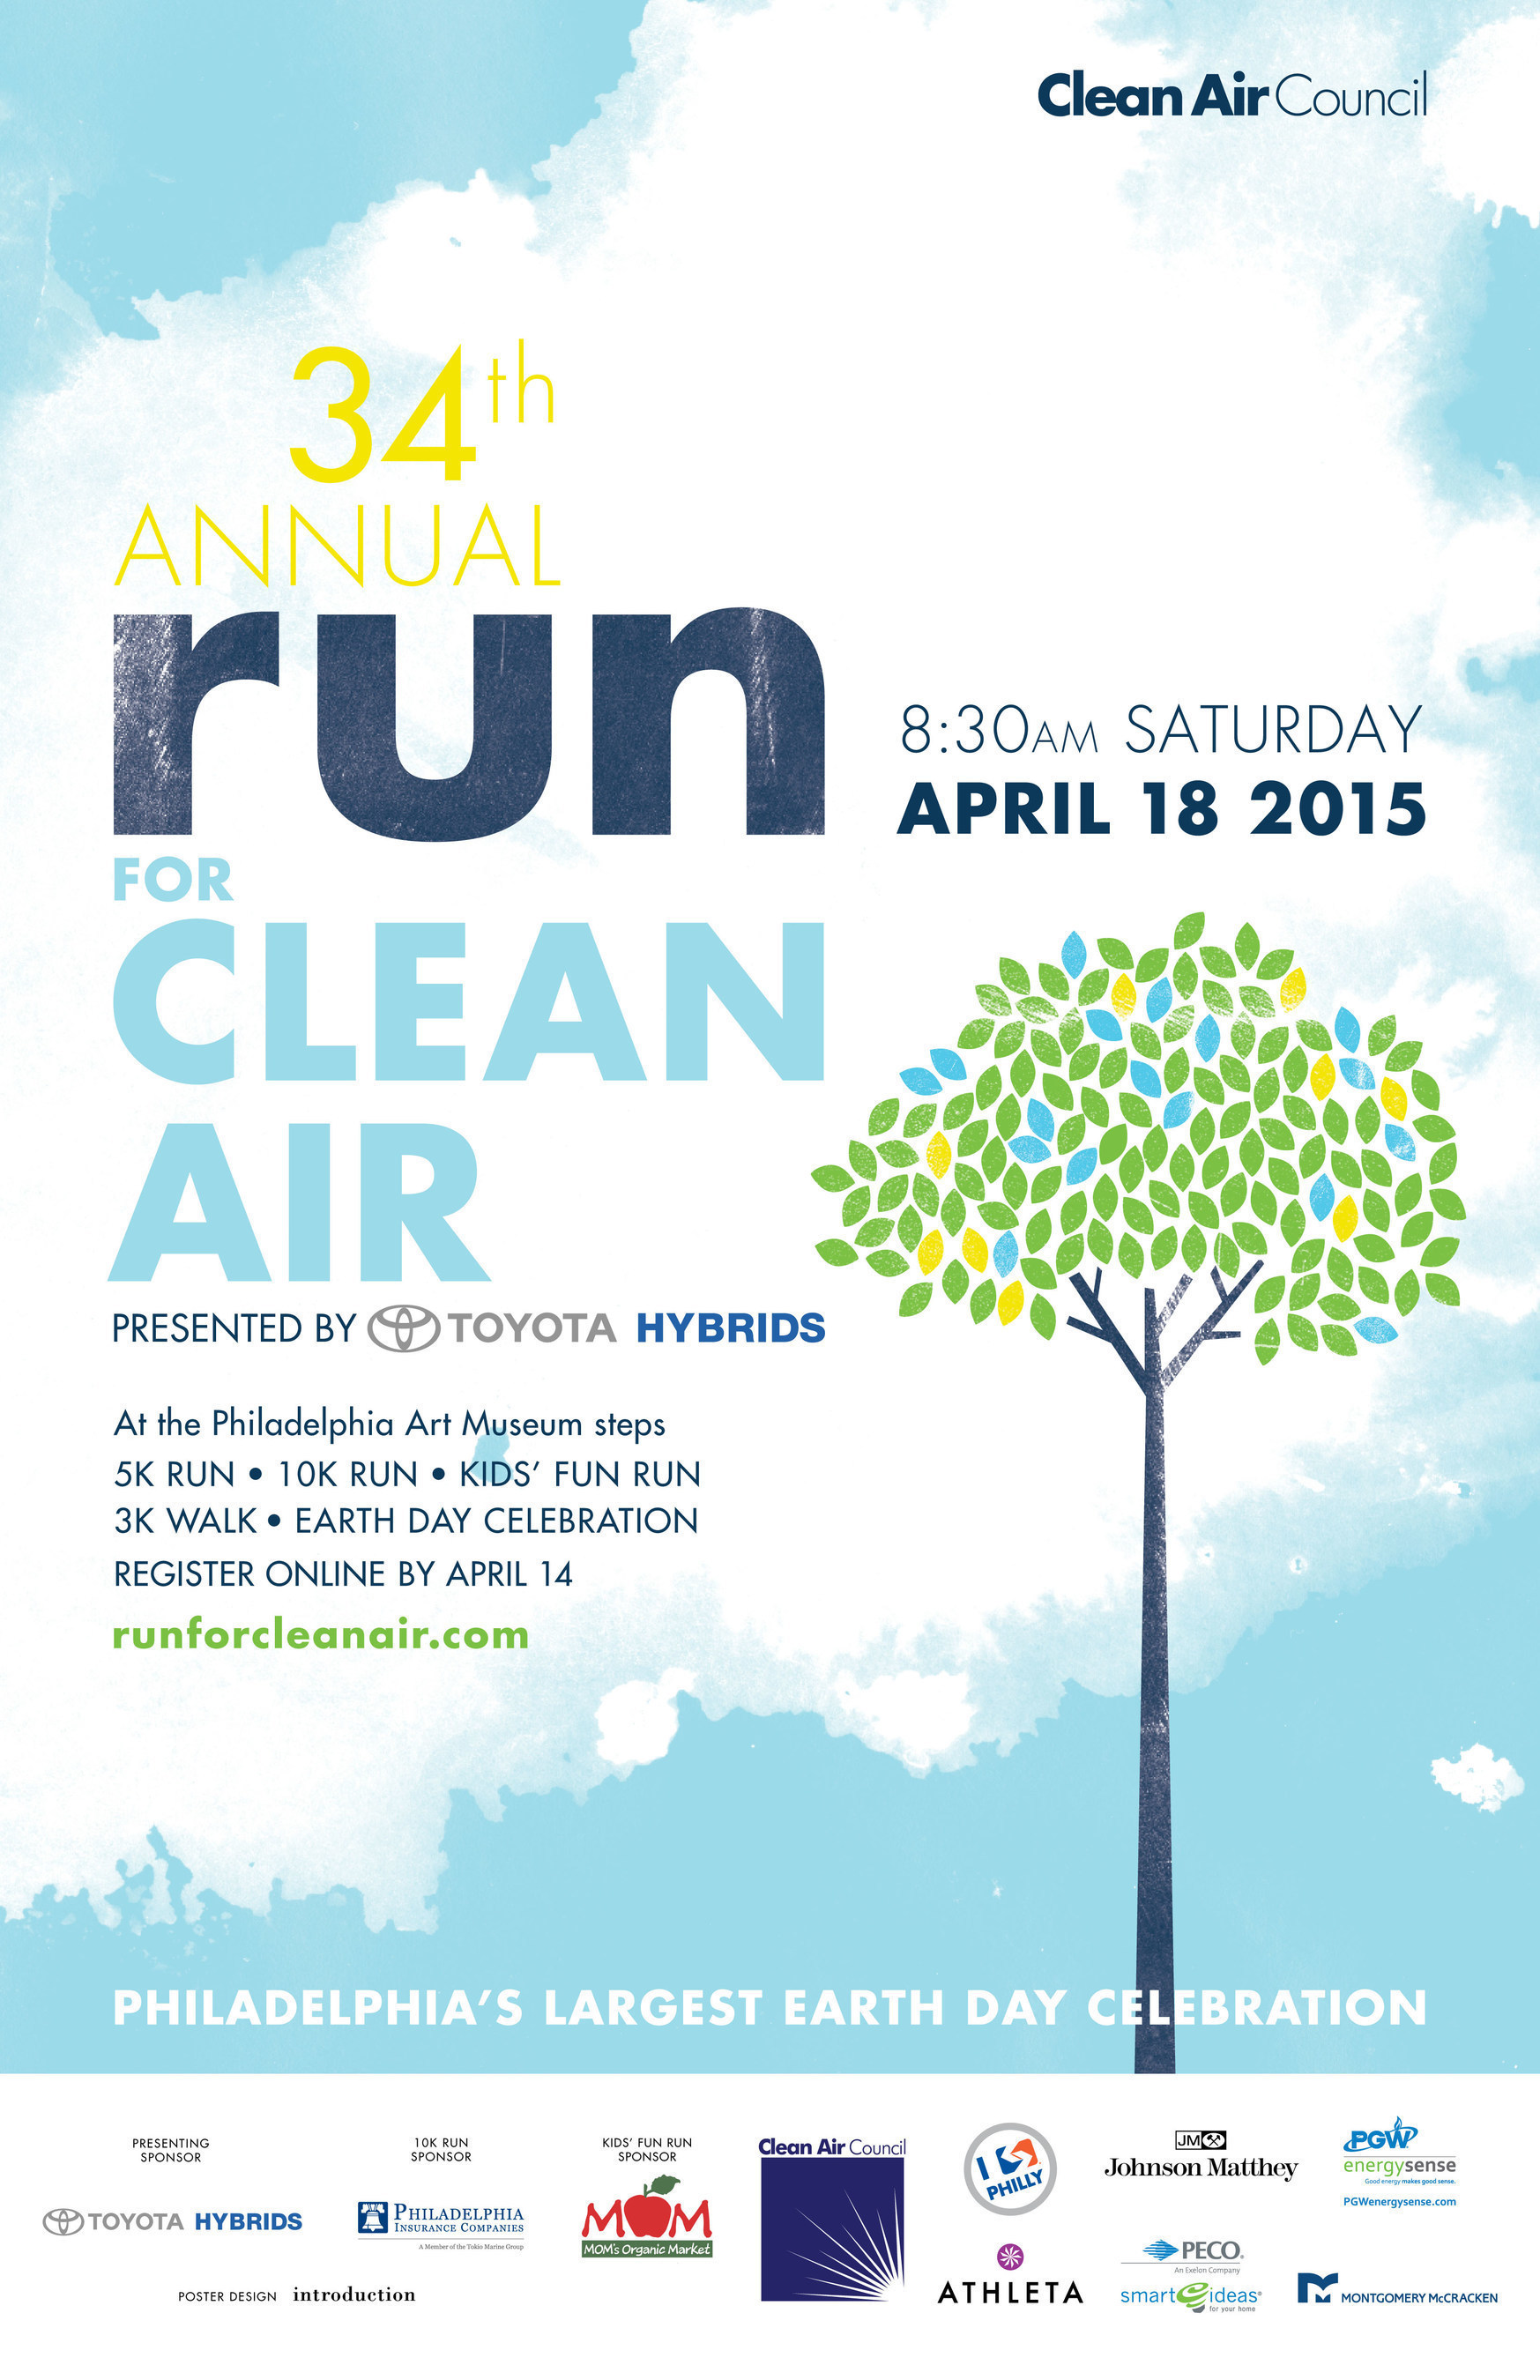 Thousands Celebrate Earth Day and Run for Clean Air in Philadelphia